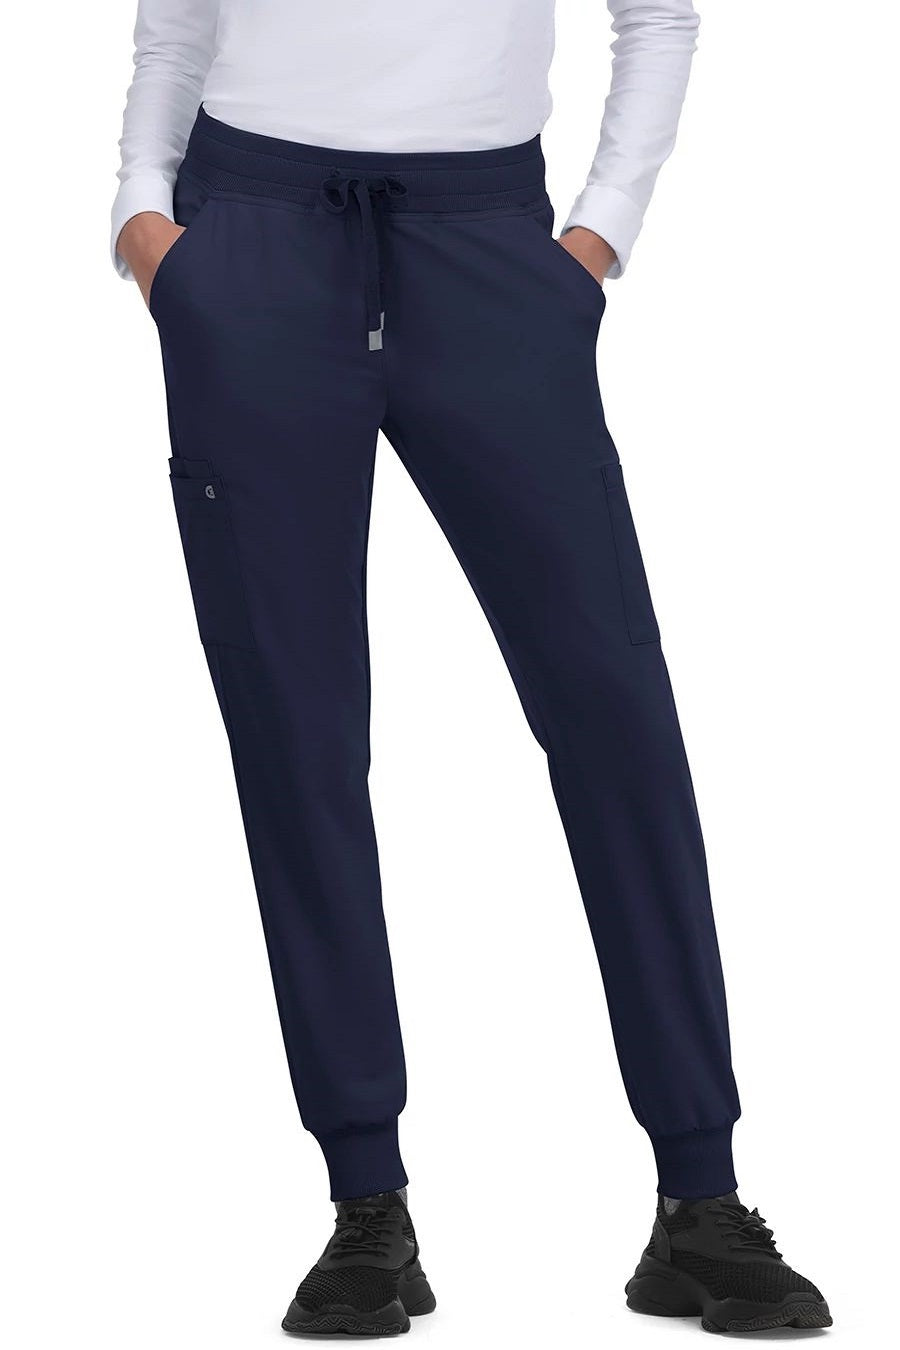 koi Scrub Pants Cureology Pulse Jogger in Navy at Parker's Clothing and Shoes.